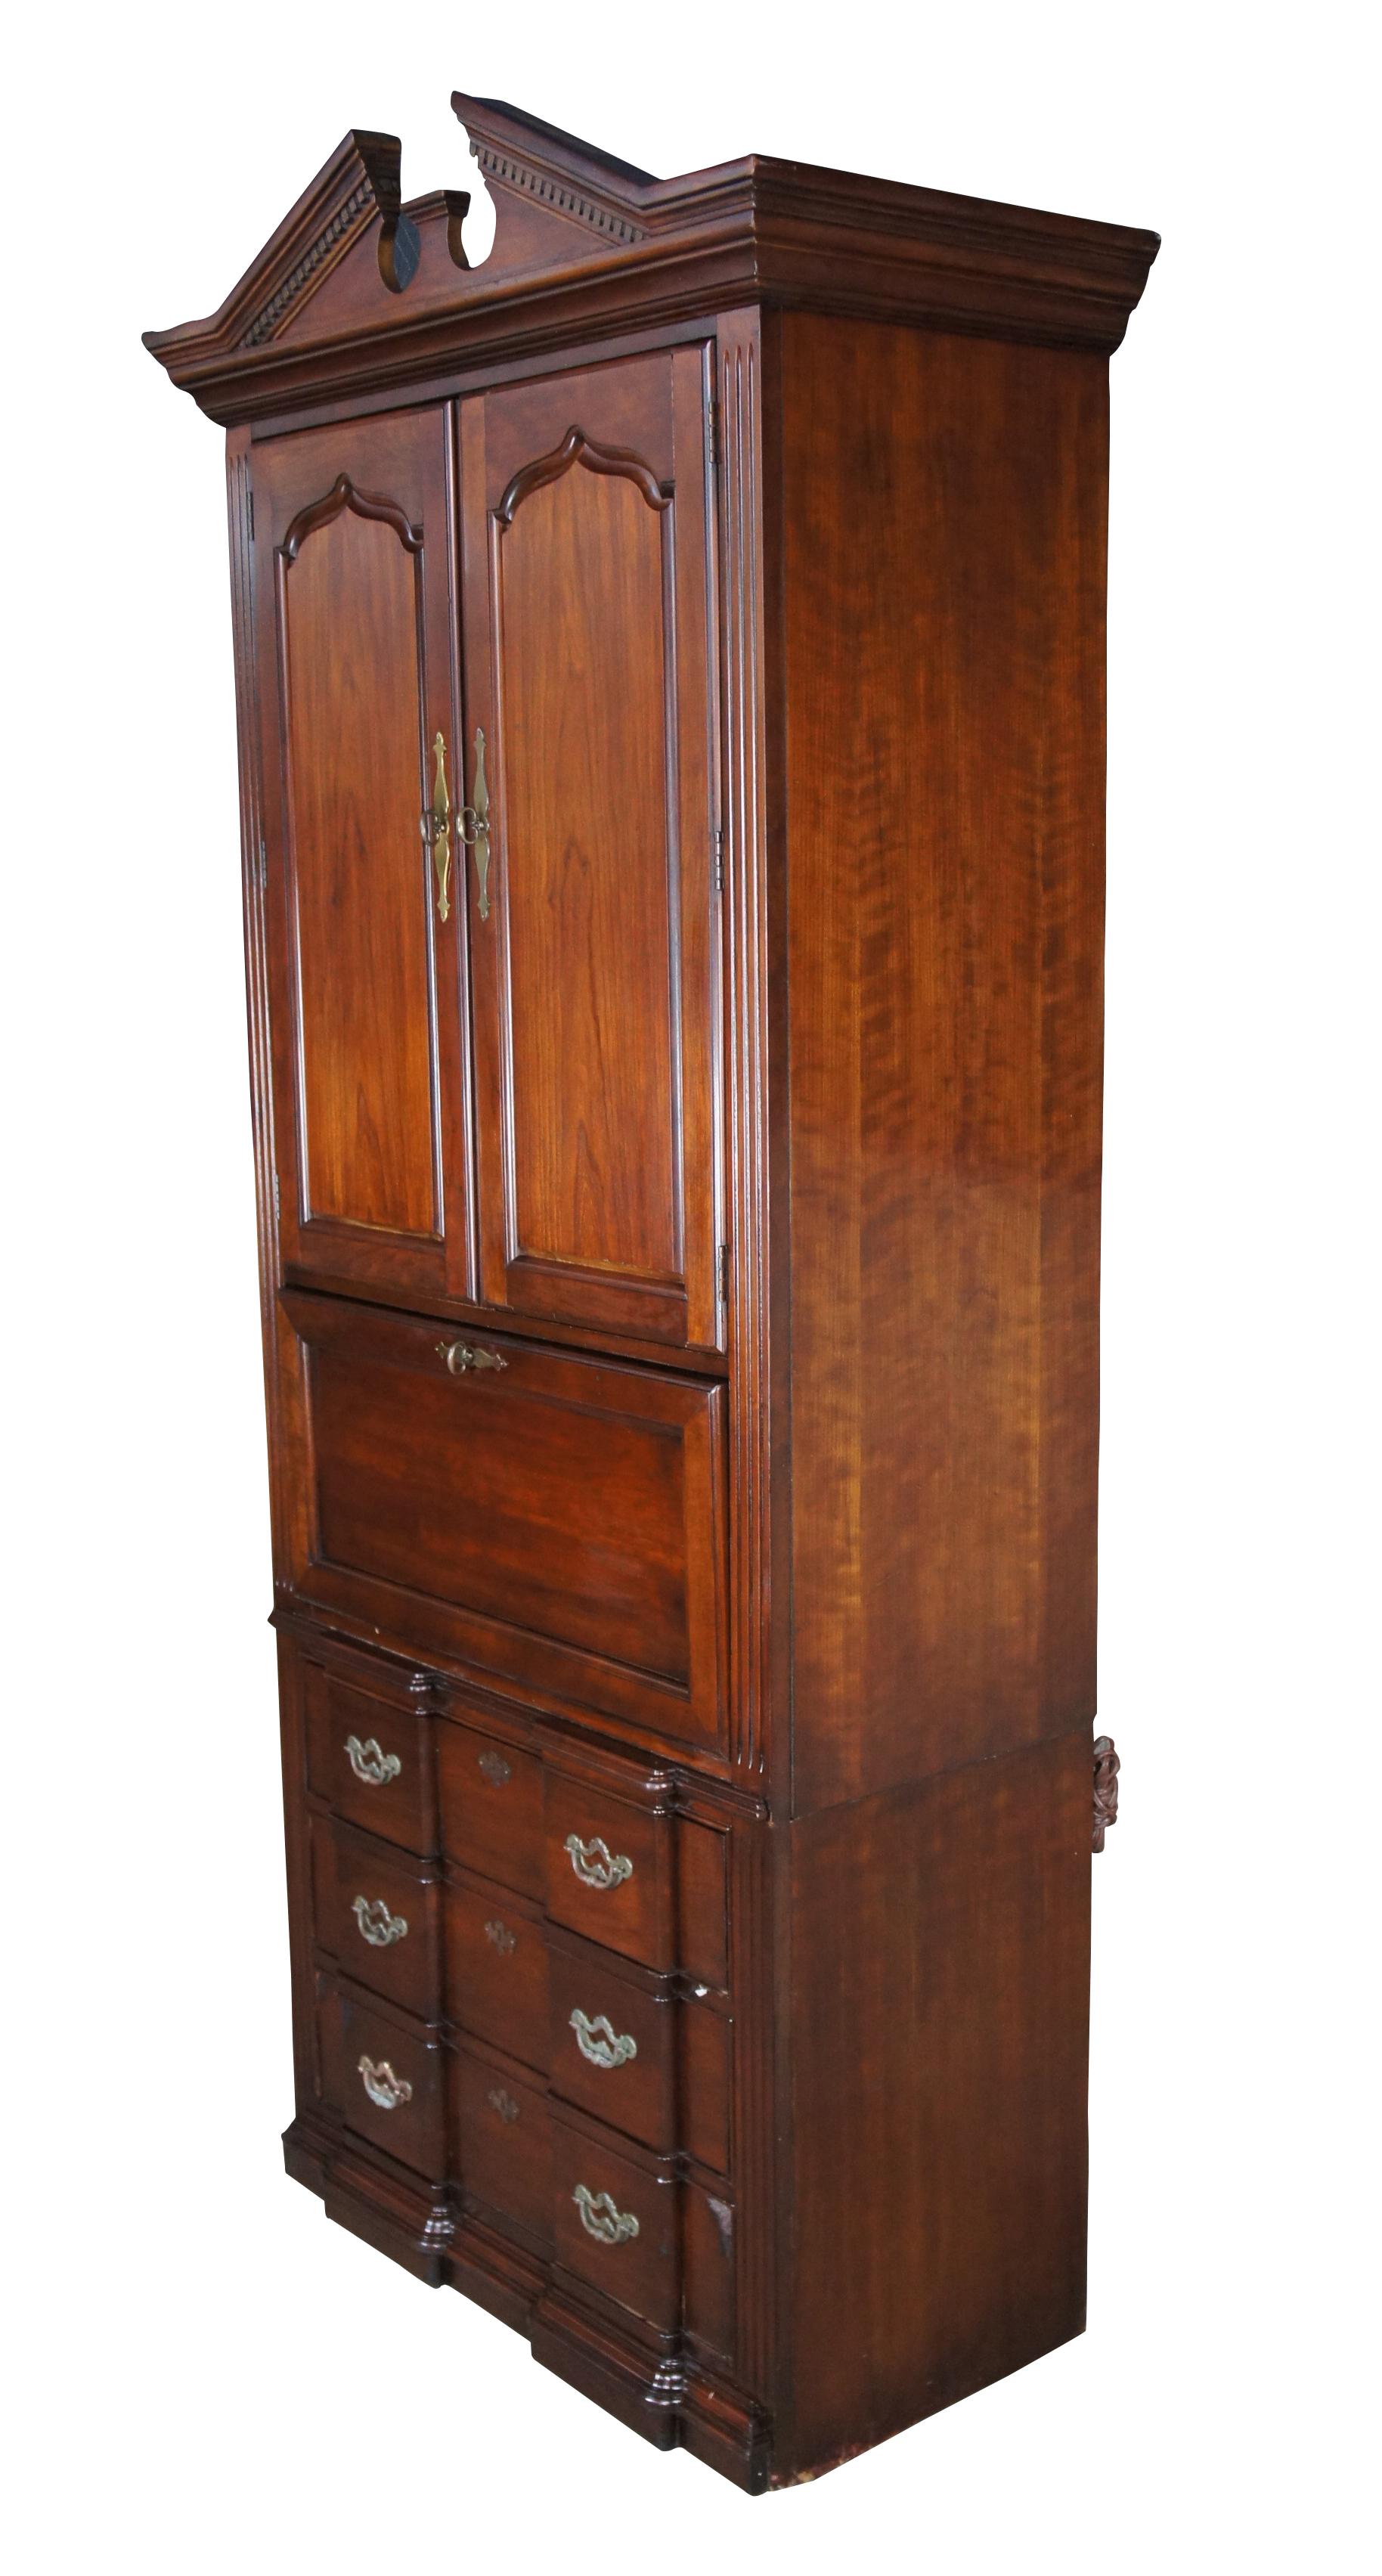 Traditional Thomasville blockfront secretary bookcase or dry bar, circa last quarter 20th century. Made from cherry with an illuminated laminate drop front work surface over three lower dovetailed drawers with brass hardware. Upper bookcase opens to